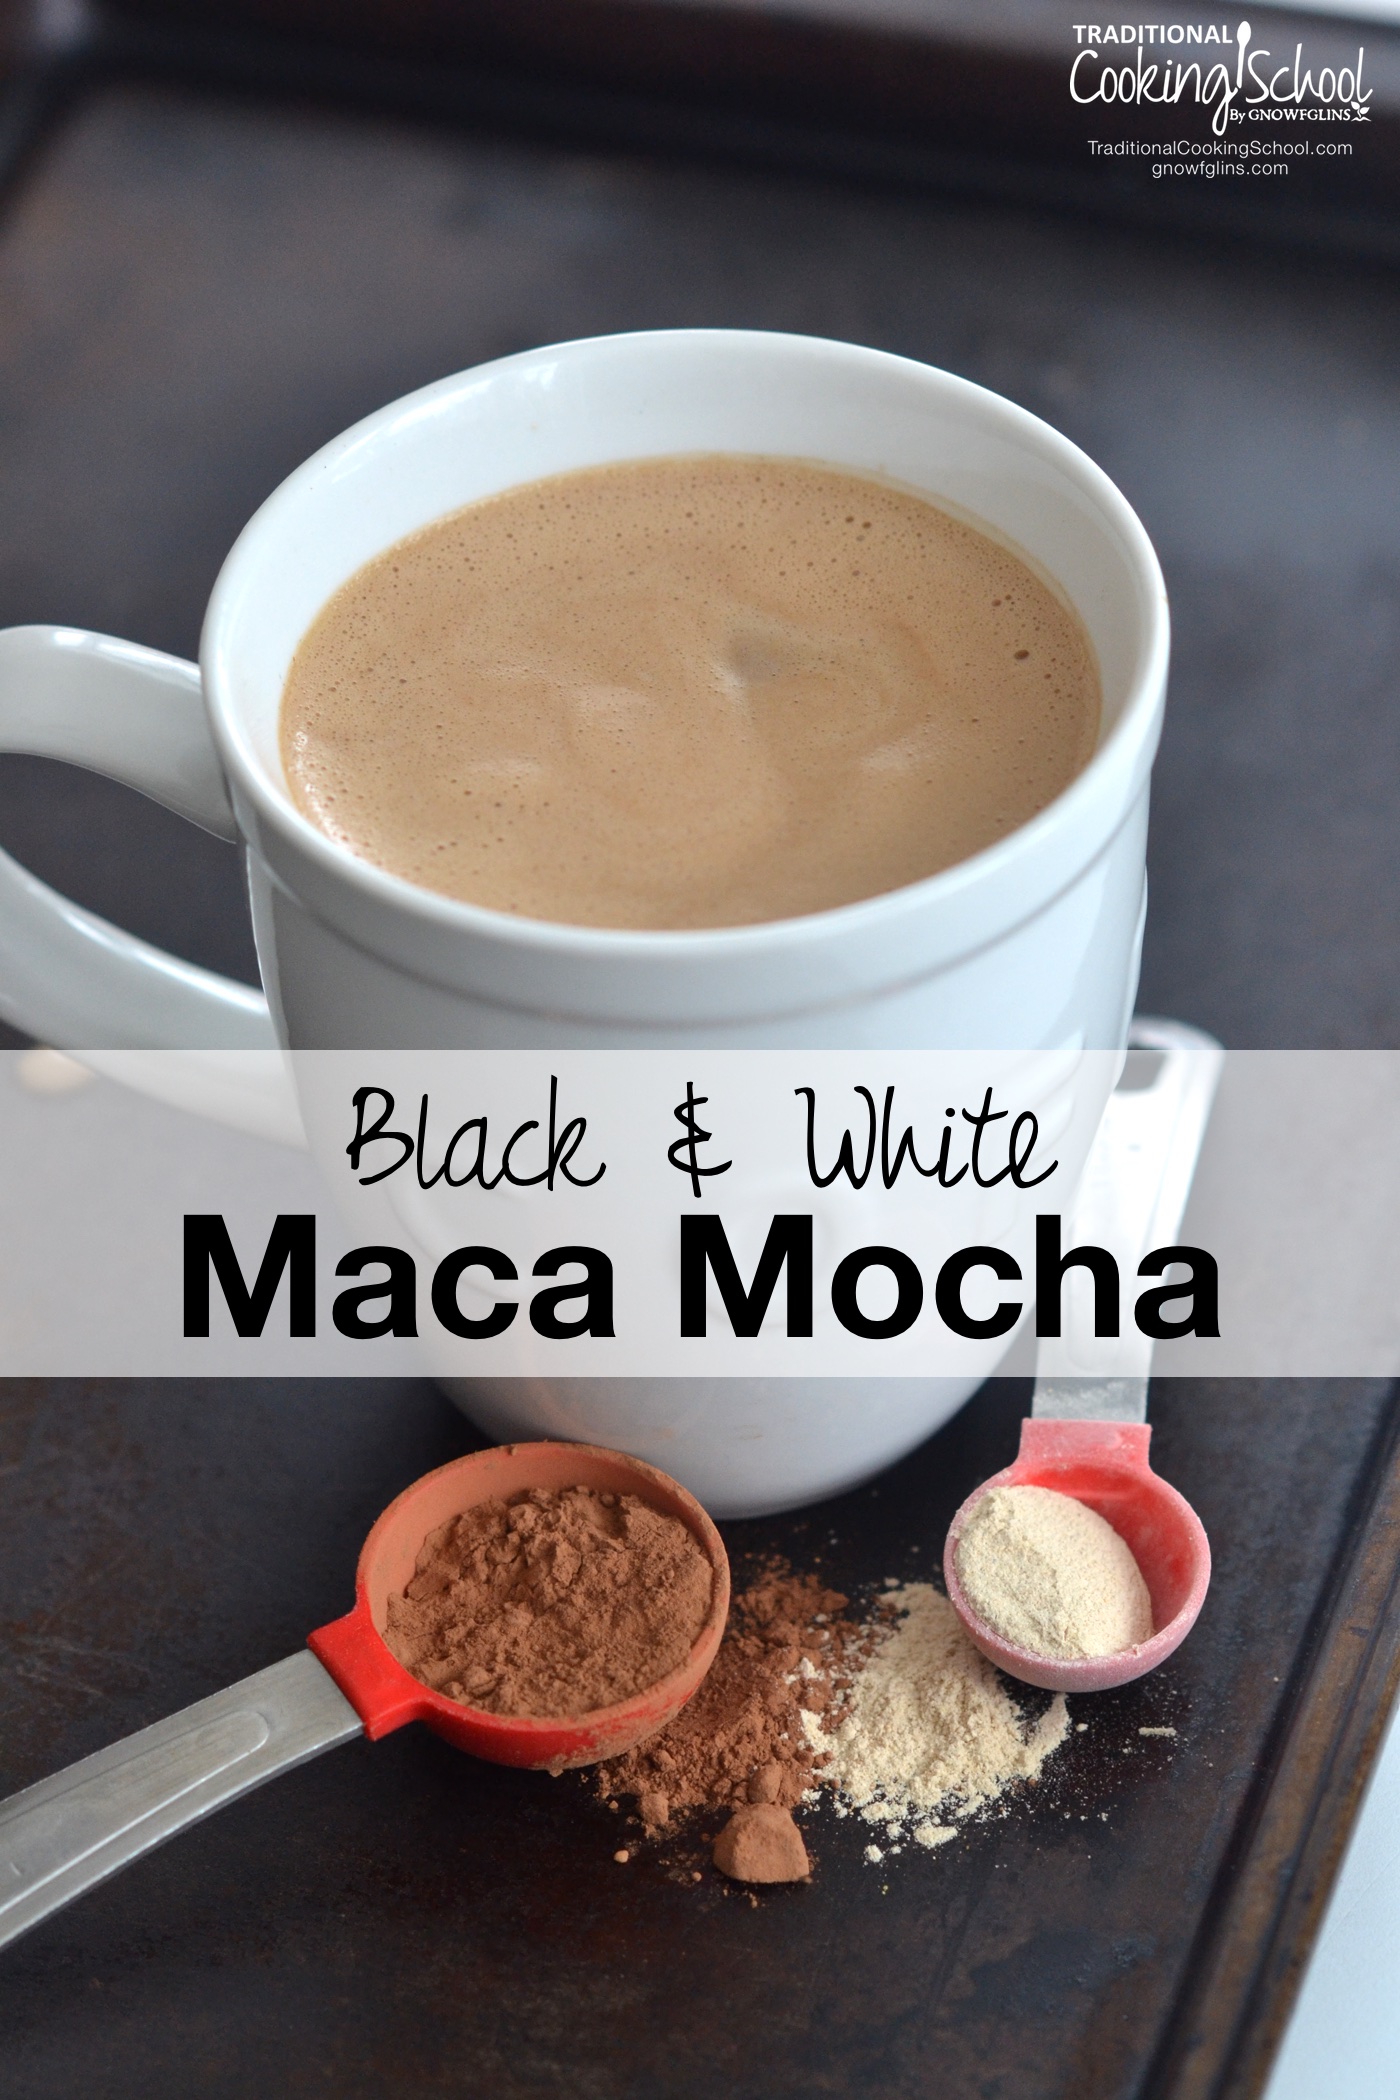 Black & White Maca Mocha | Recently I realized that I just couldn't remember the last time I'd woken up feeling completely rested. My lack of energy could have been caused by a number of things; all I know is that I wanted to feel better. Enter: maca. I experimented with it by putting it in all my drinks. My energy now? Extended instead of sporadic! Here is one hot drink that gets my day going with maca! | TraditionalCookingSchool.com